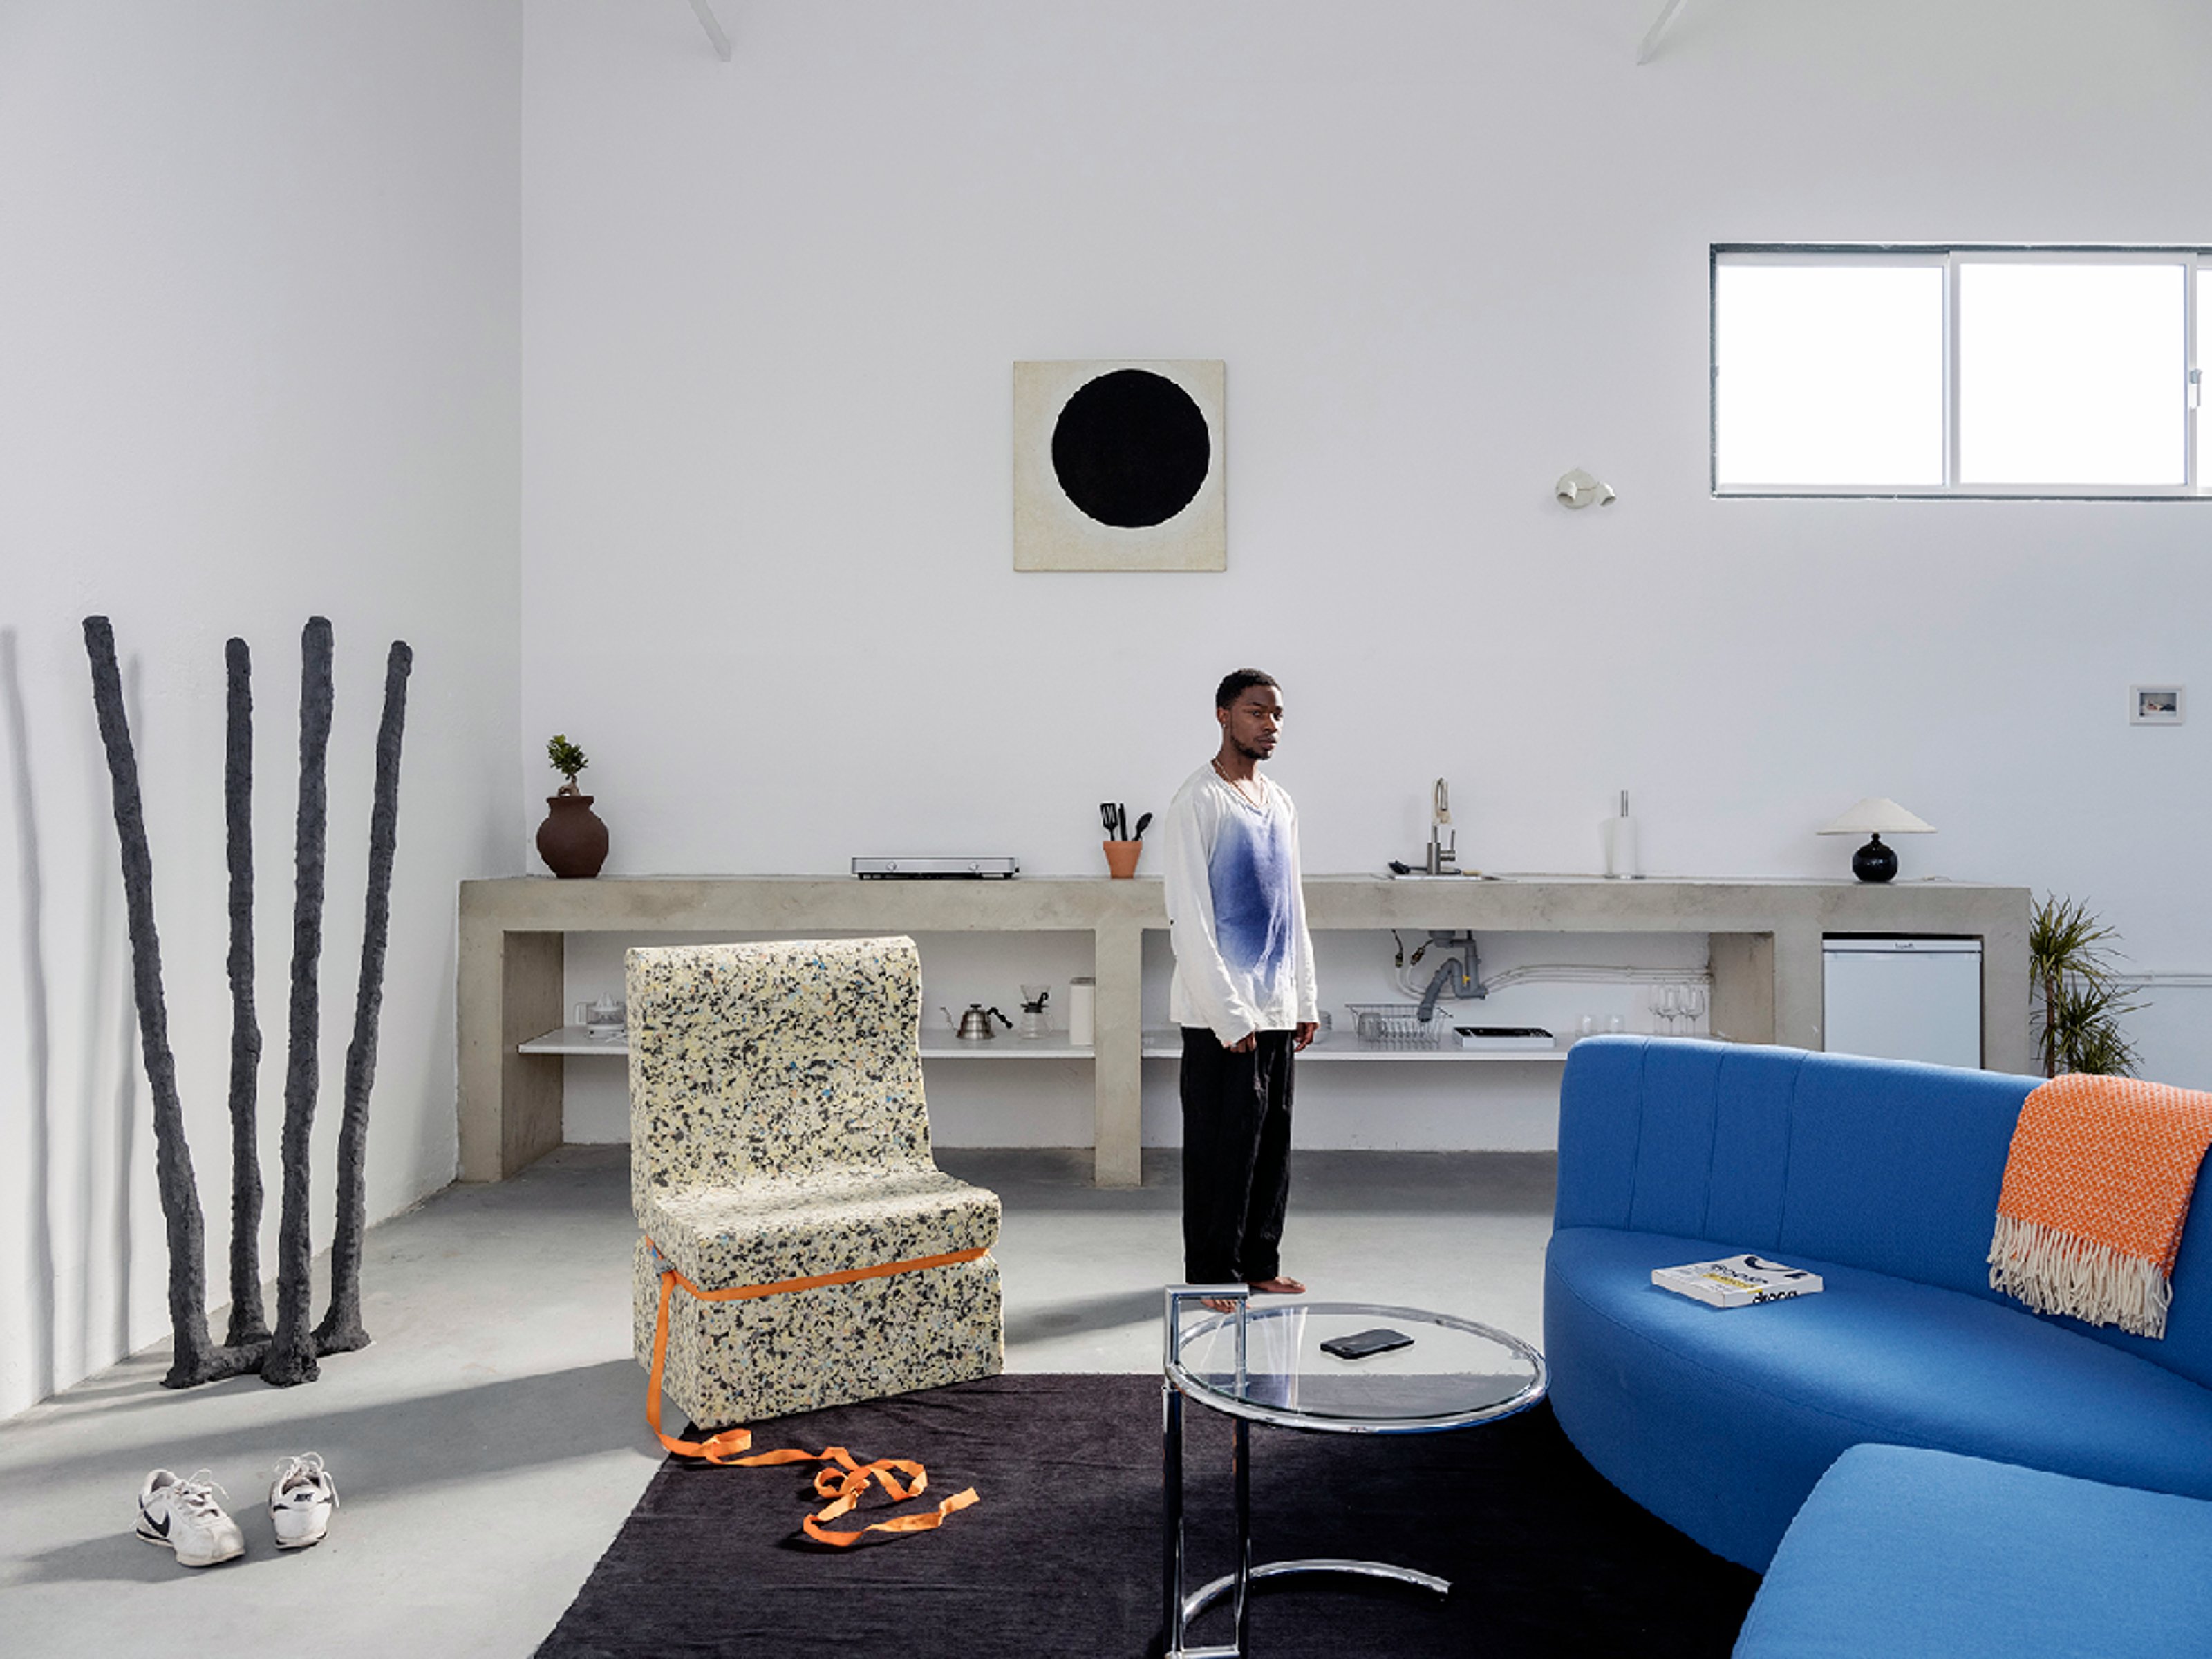 Dozie Kanu standing in a high ceiling space with white walls, minimal beige and gray colored objects around, a blue armchair and a black rug.